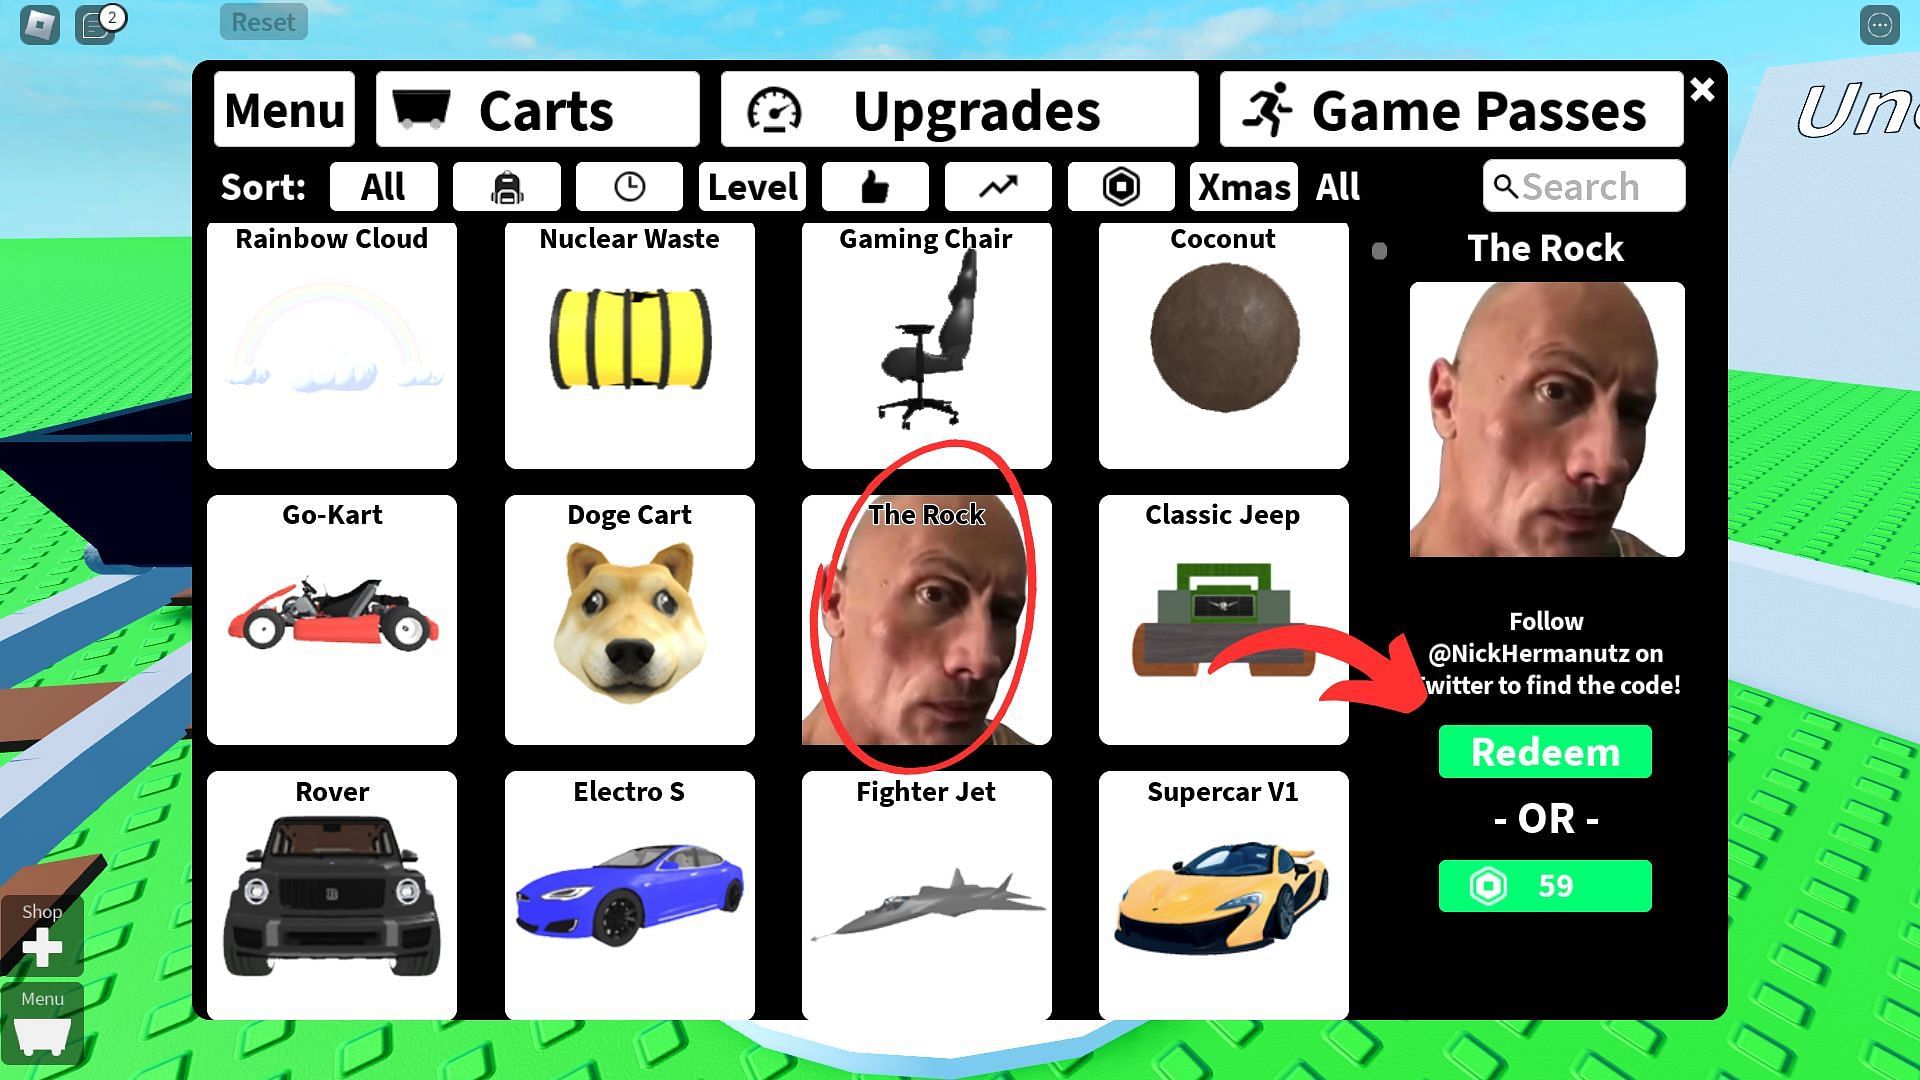 How to redeem codes for Create a Cart Ride (Image via Roblox and Sportskeeda)